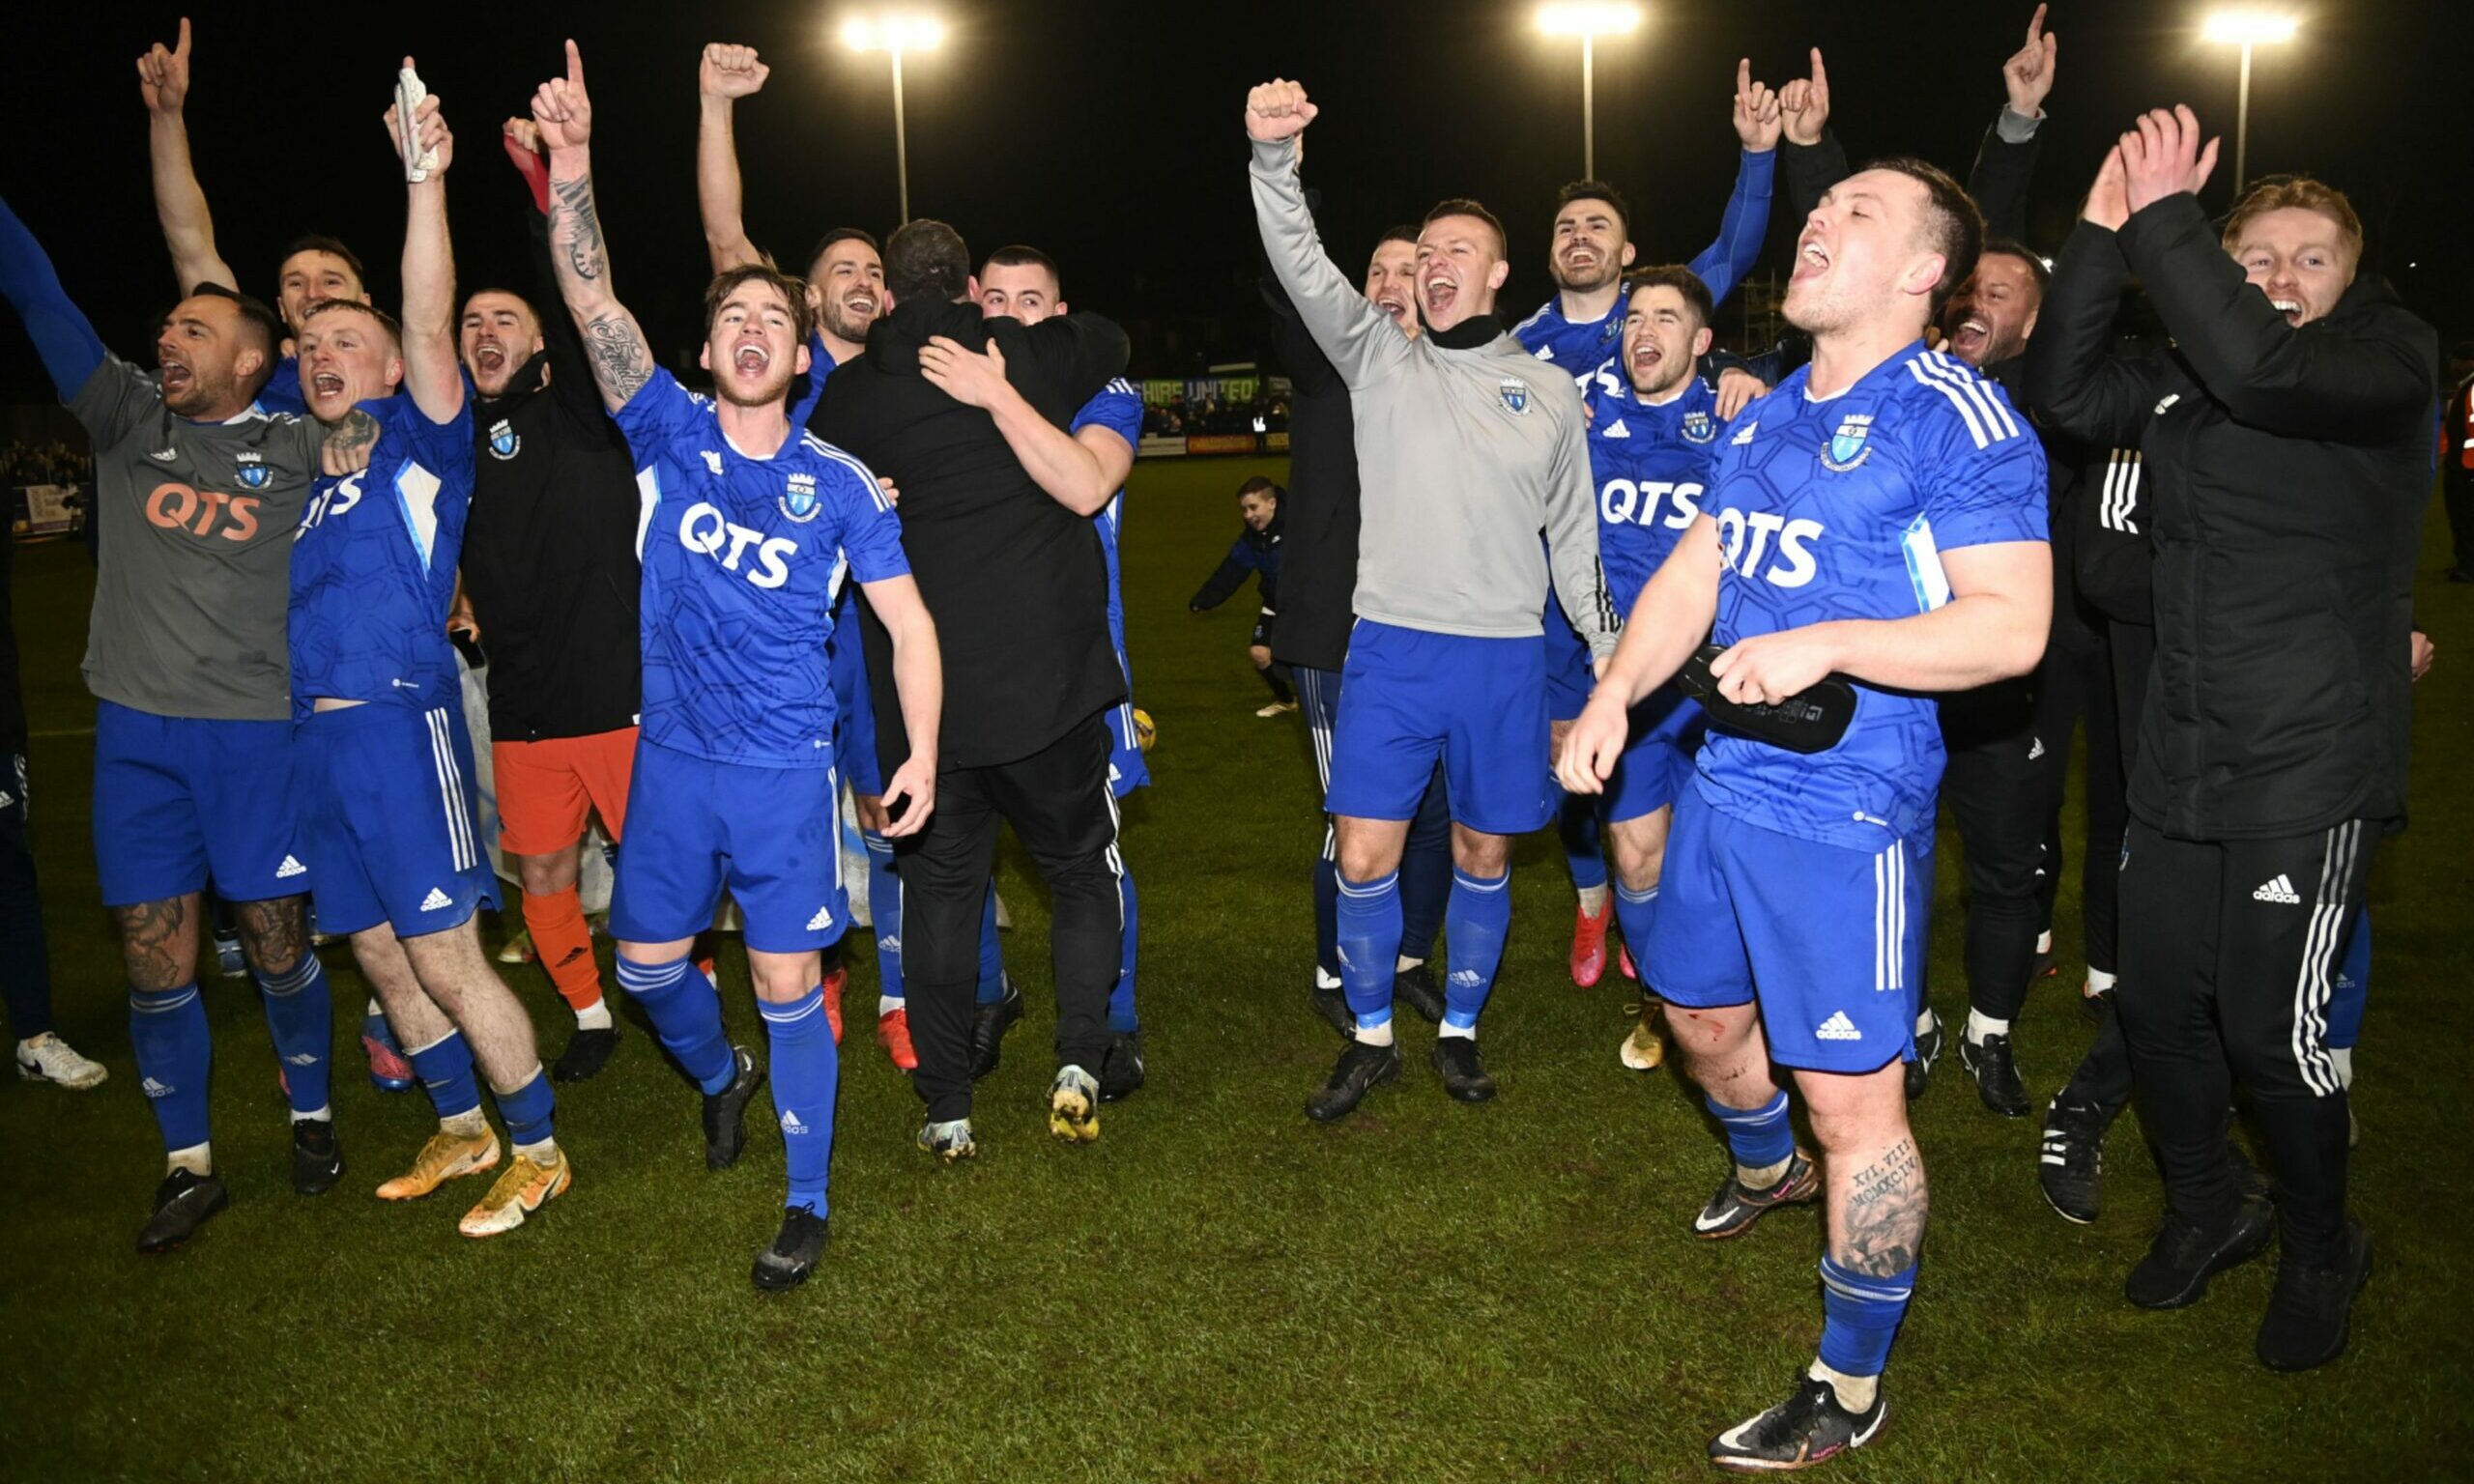 Darvel Football club celebrating after winning a game against Aberdeen